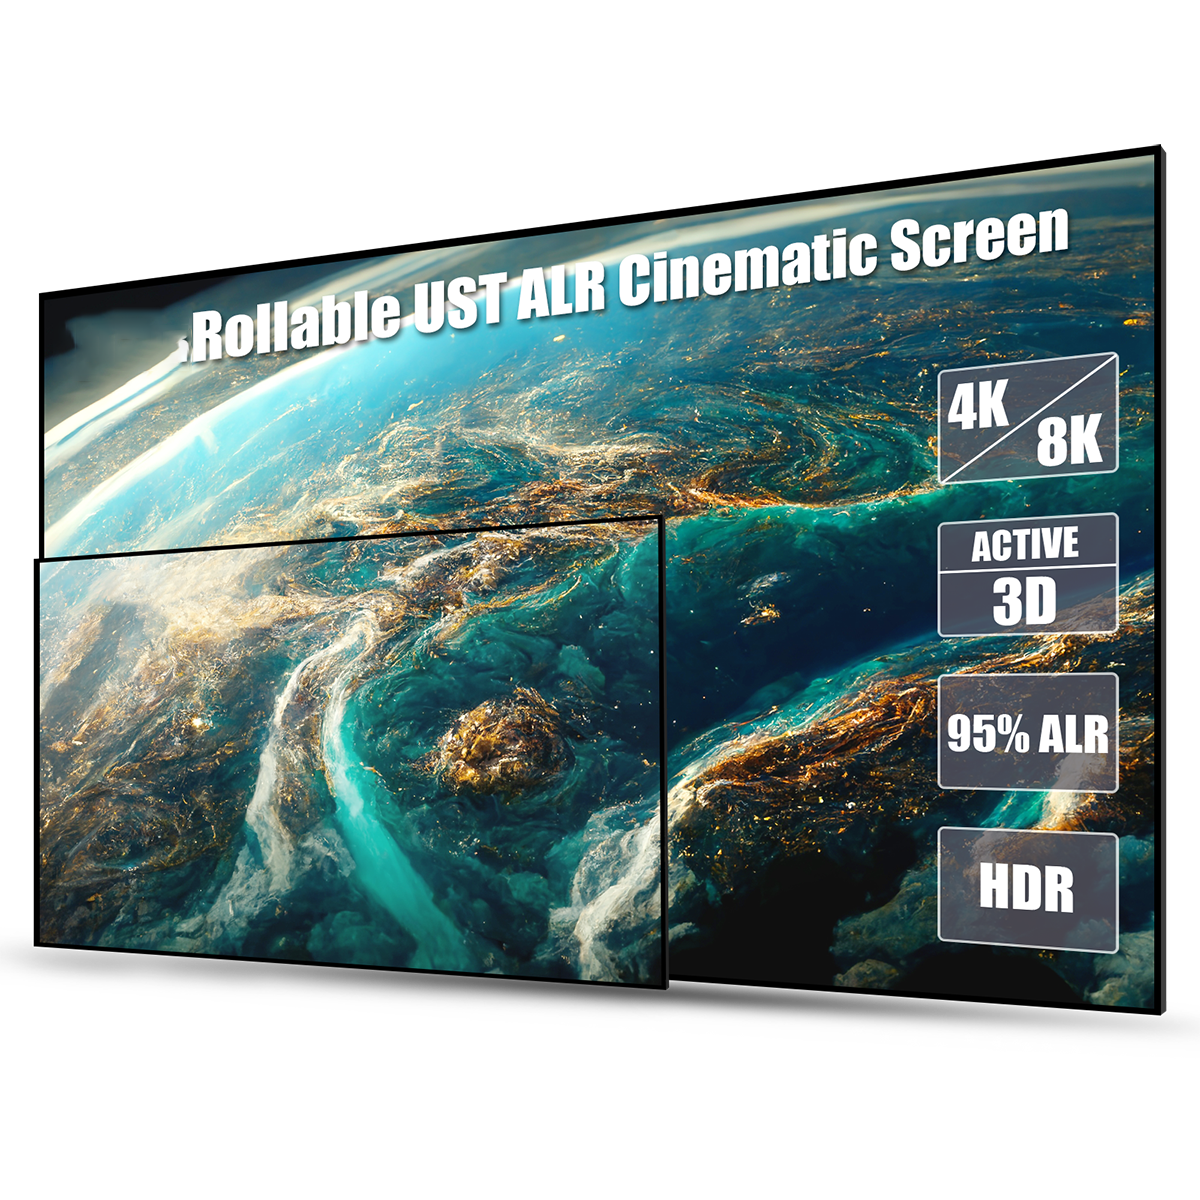 AWOL 120Inch ALR Projector Cinematic Screen UST 16:9 170° Viewing Angle Ambient 95% Ceiling Light Giant Cinema Screen COD